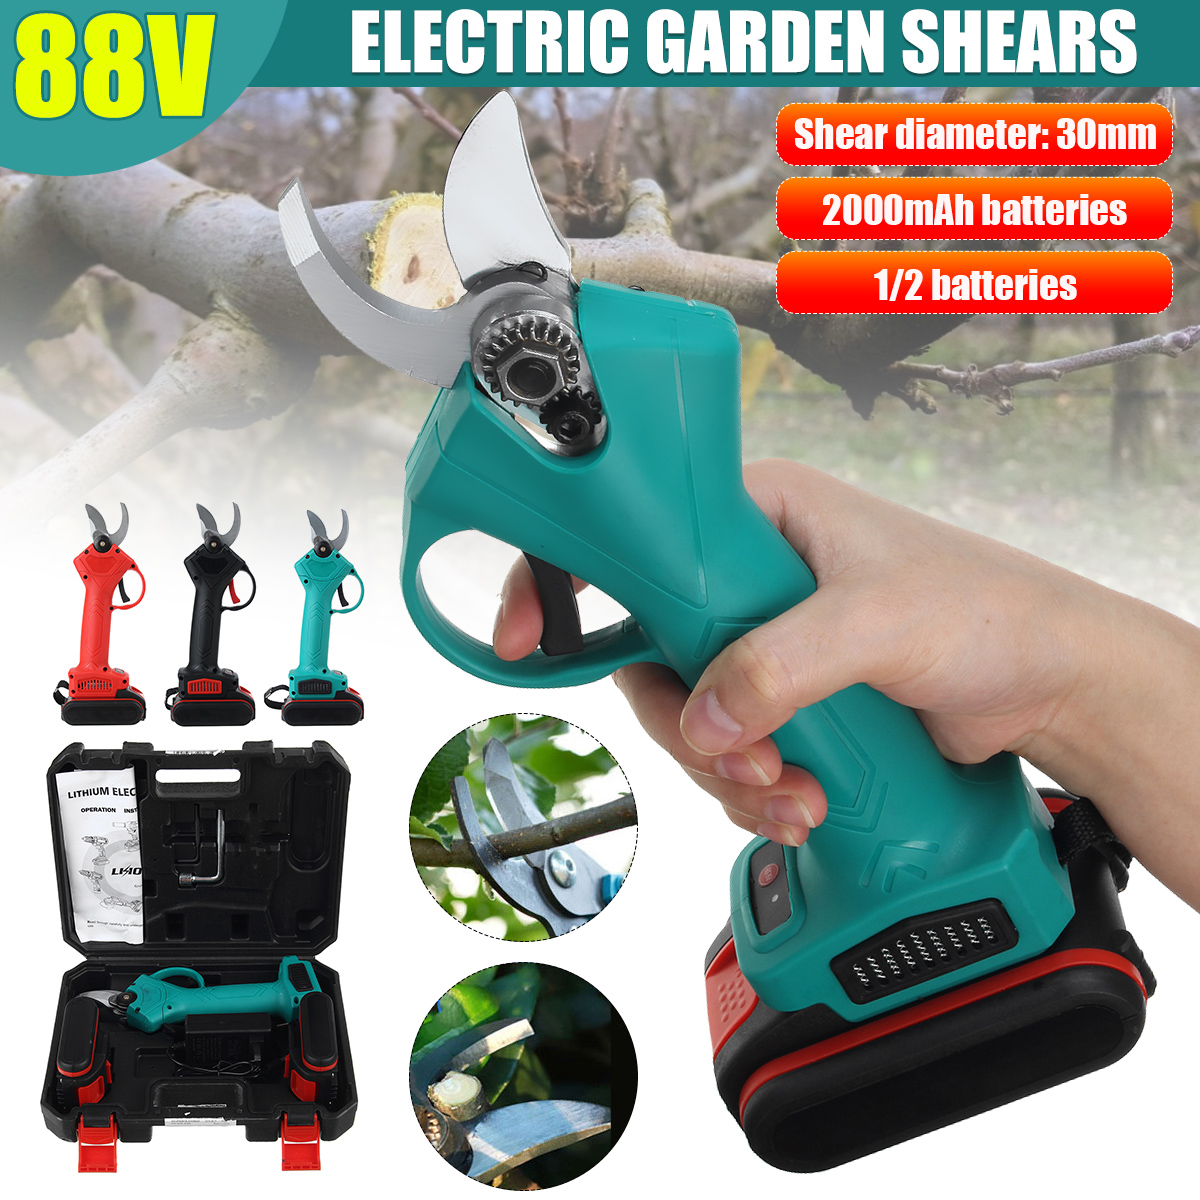 Electric-Cordless-Rechargeable-Pruning-Garden-Shears-Secateur-Cutter-With-Two-Batteries-1738685-1